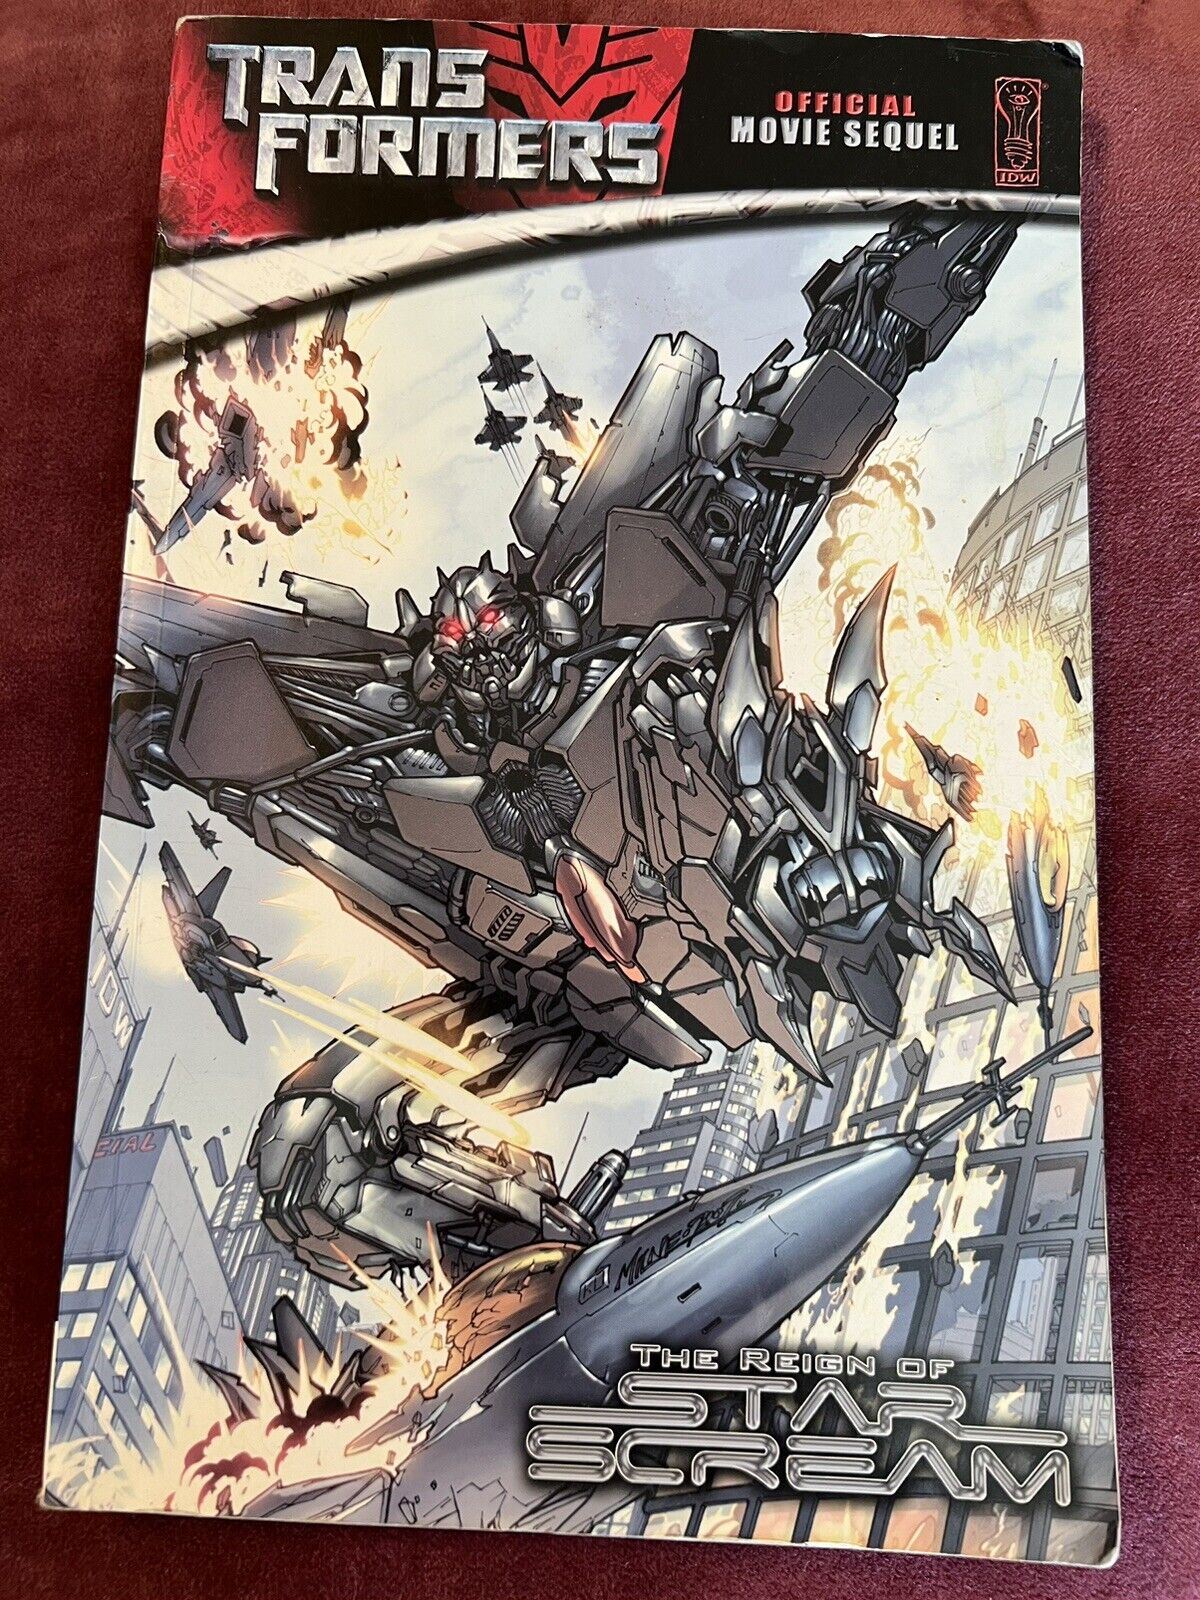 The Transformers Movie Sequel: the Reign of Starscream (IDW Publishing July...